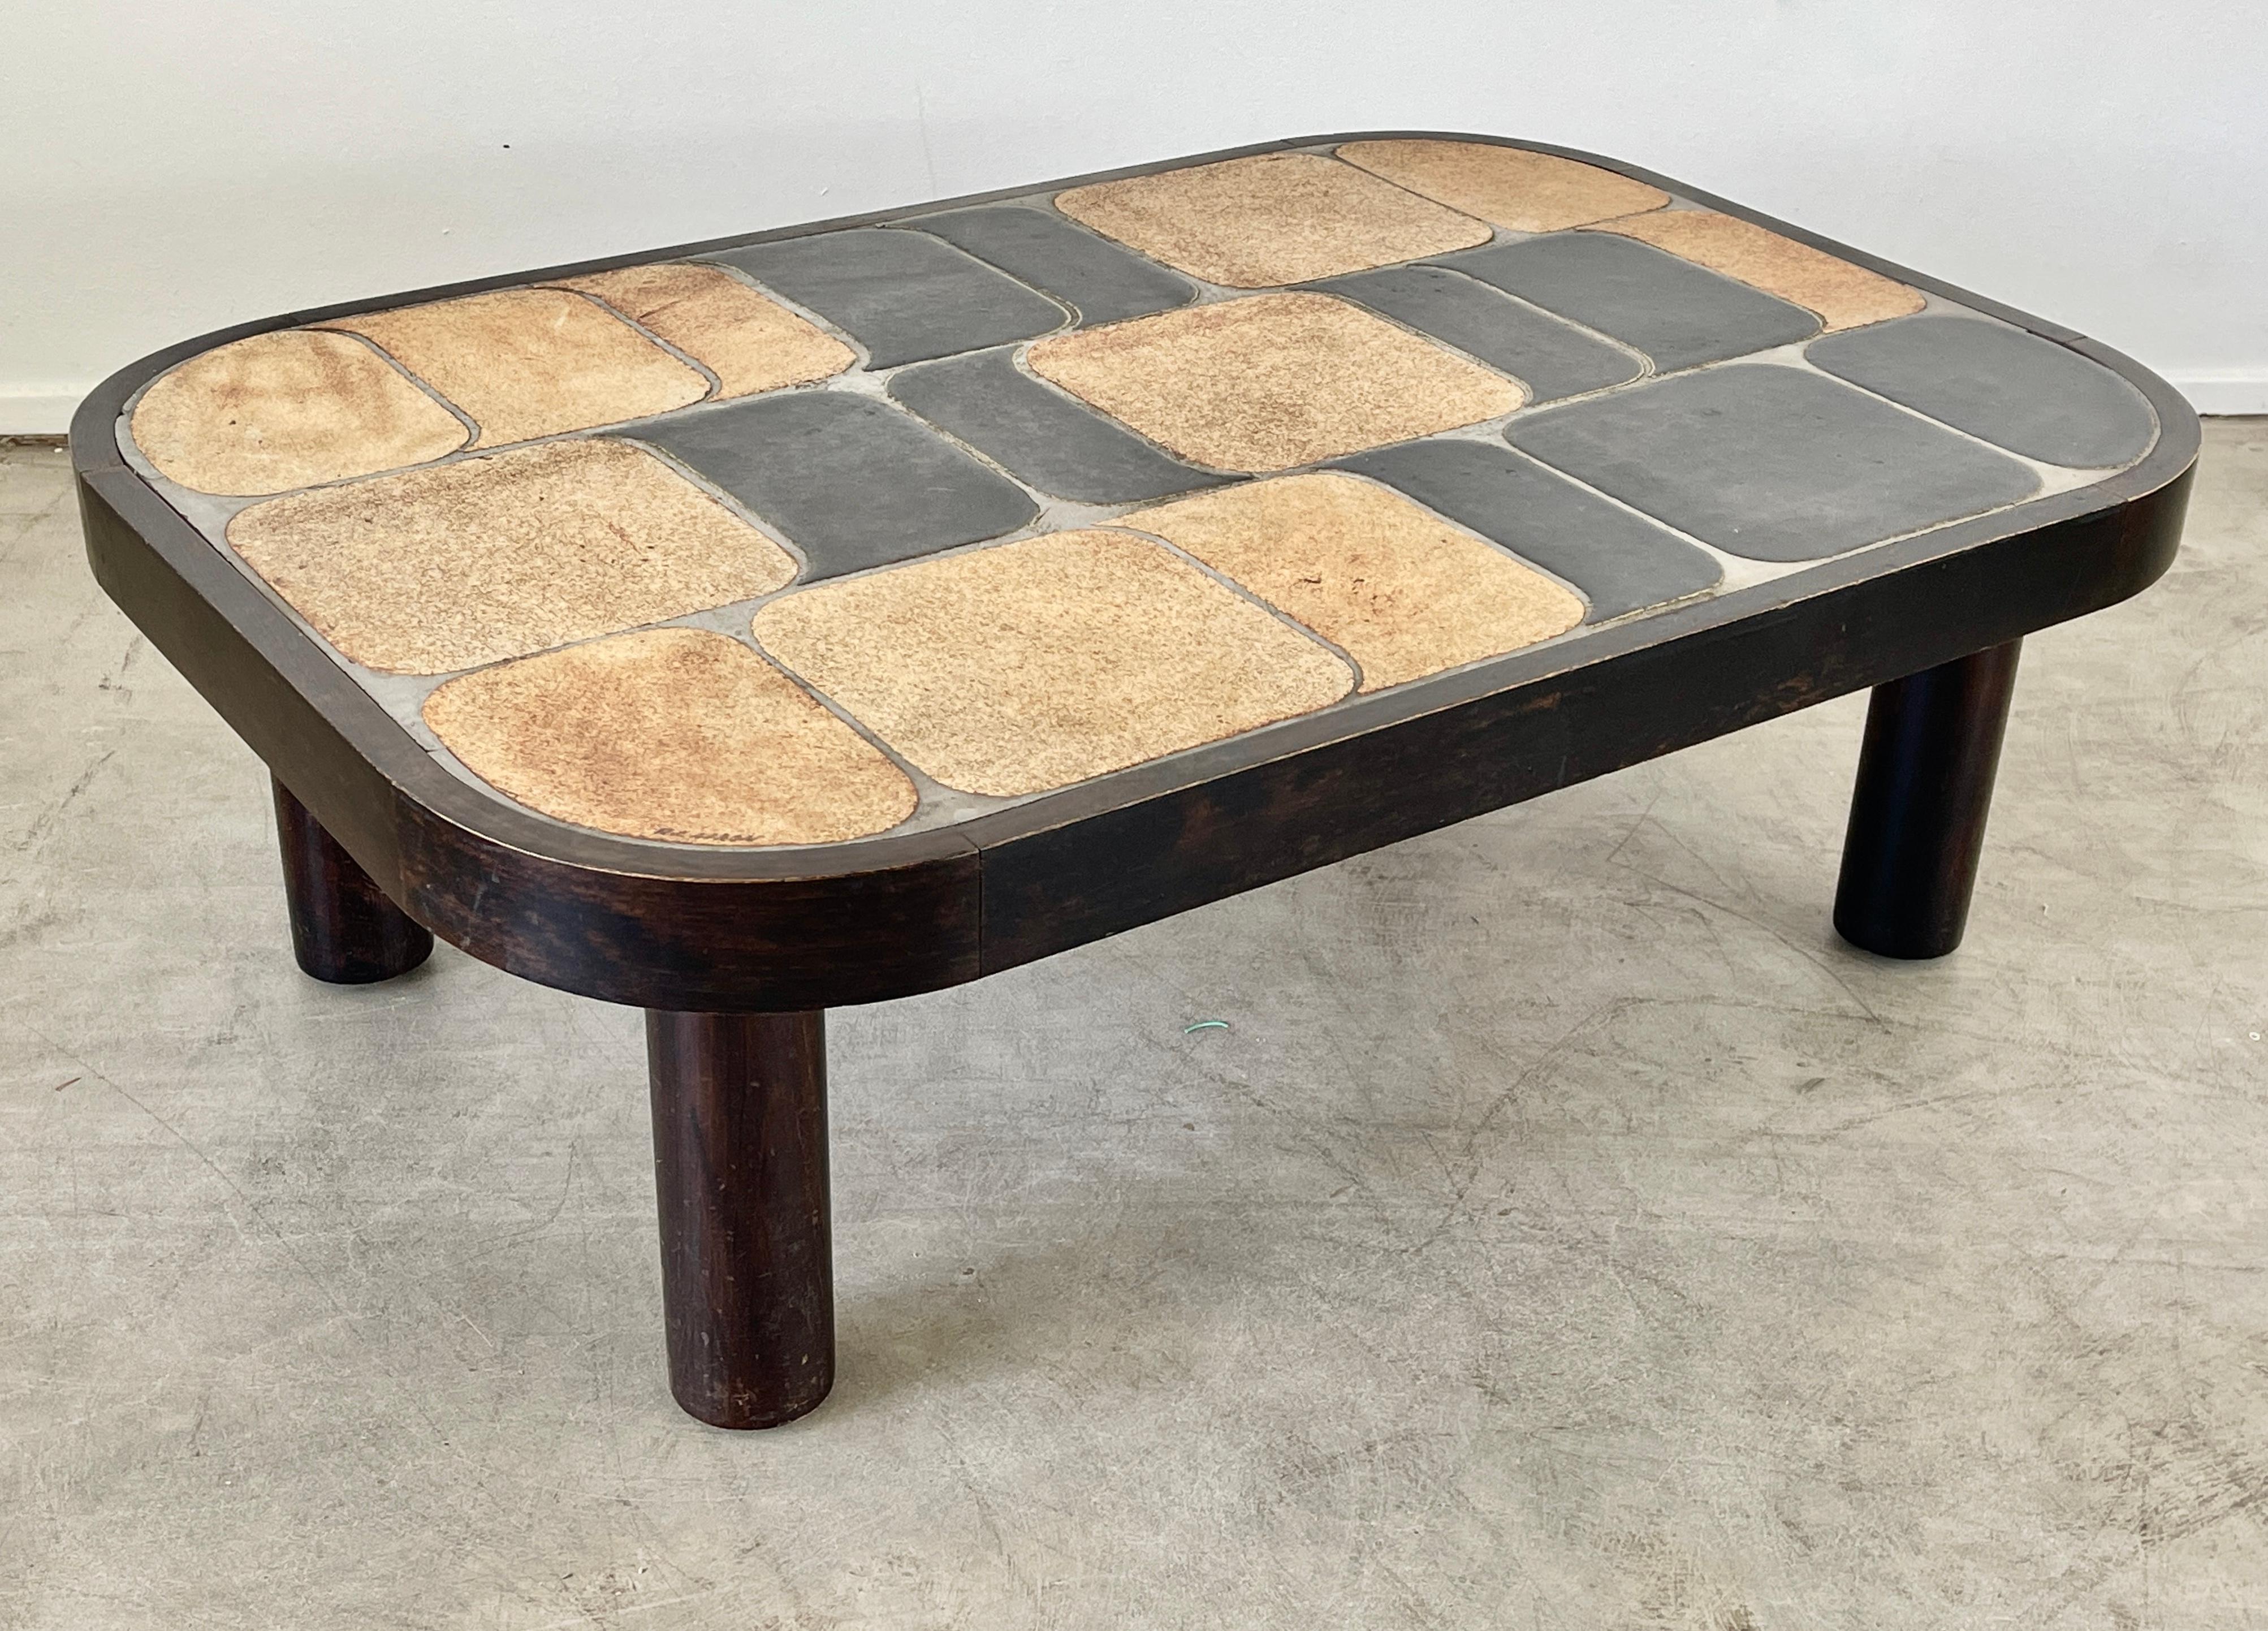 Wonderful ceramic tile top coffee table designed by Roger Capron. (signed) 
Features his unique 